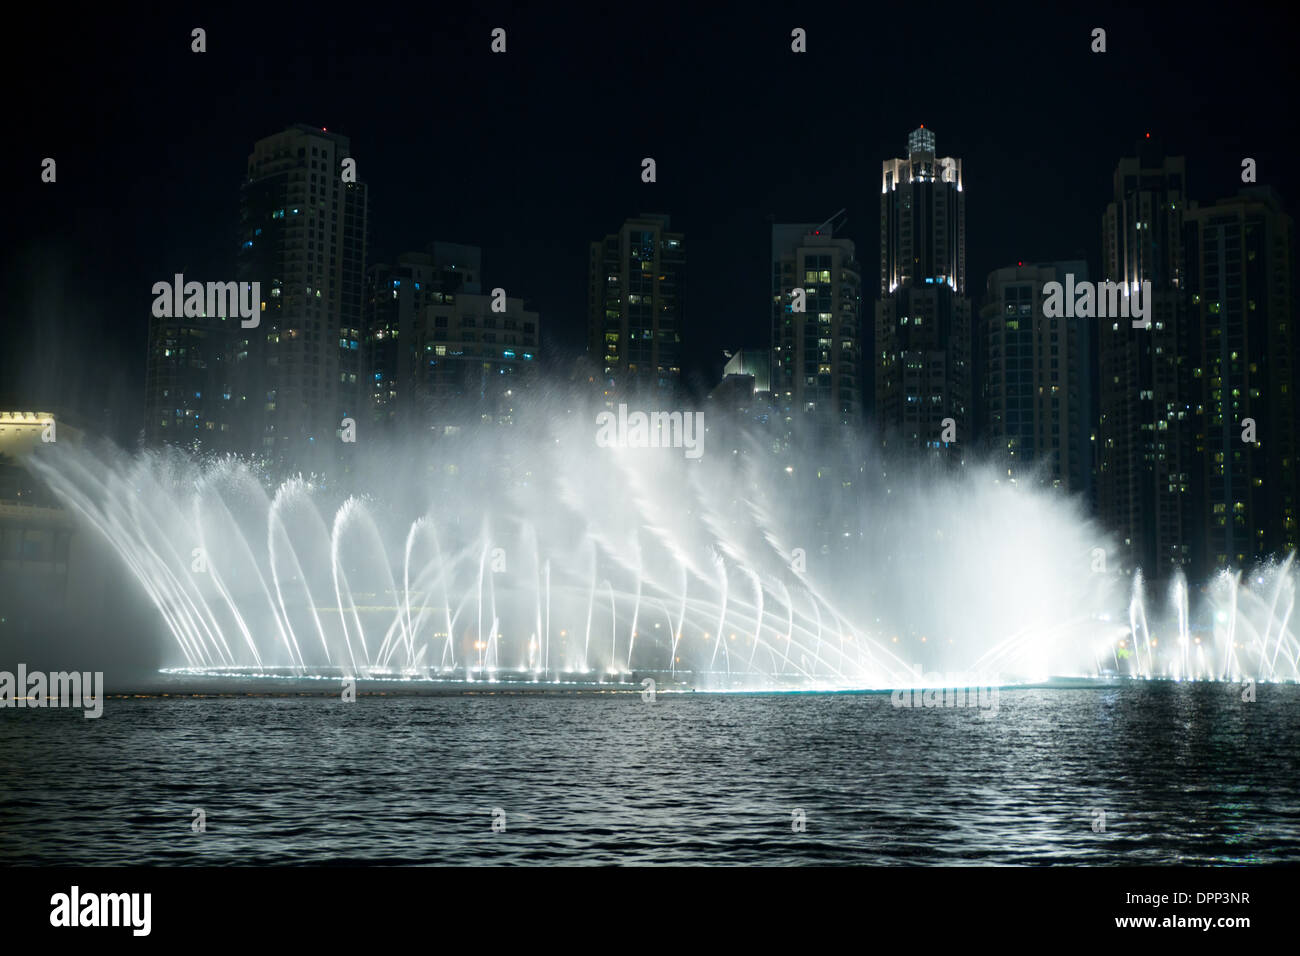 Dubai fountain show, one of the most powerful and entertaining fountain shows in the world as of 2013 Stock Photo